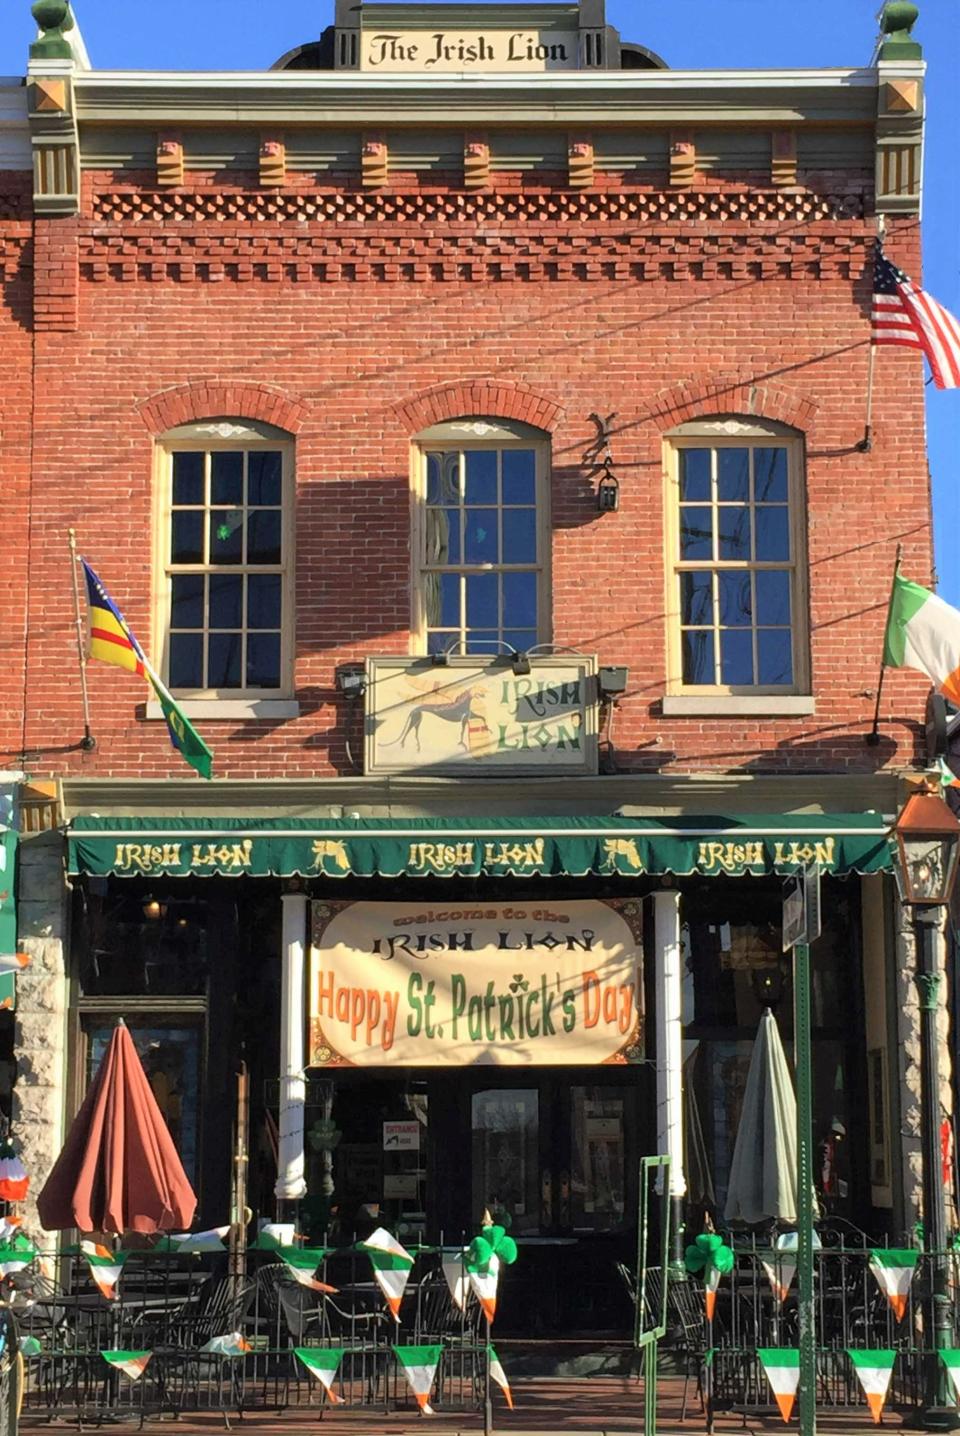 Irish Lion Restaurant and Pub will be celebrating St. Patrick's Day on Thursday, but there will be no reservations taken for that day.